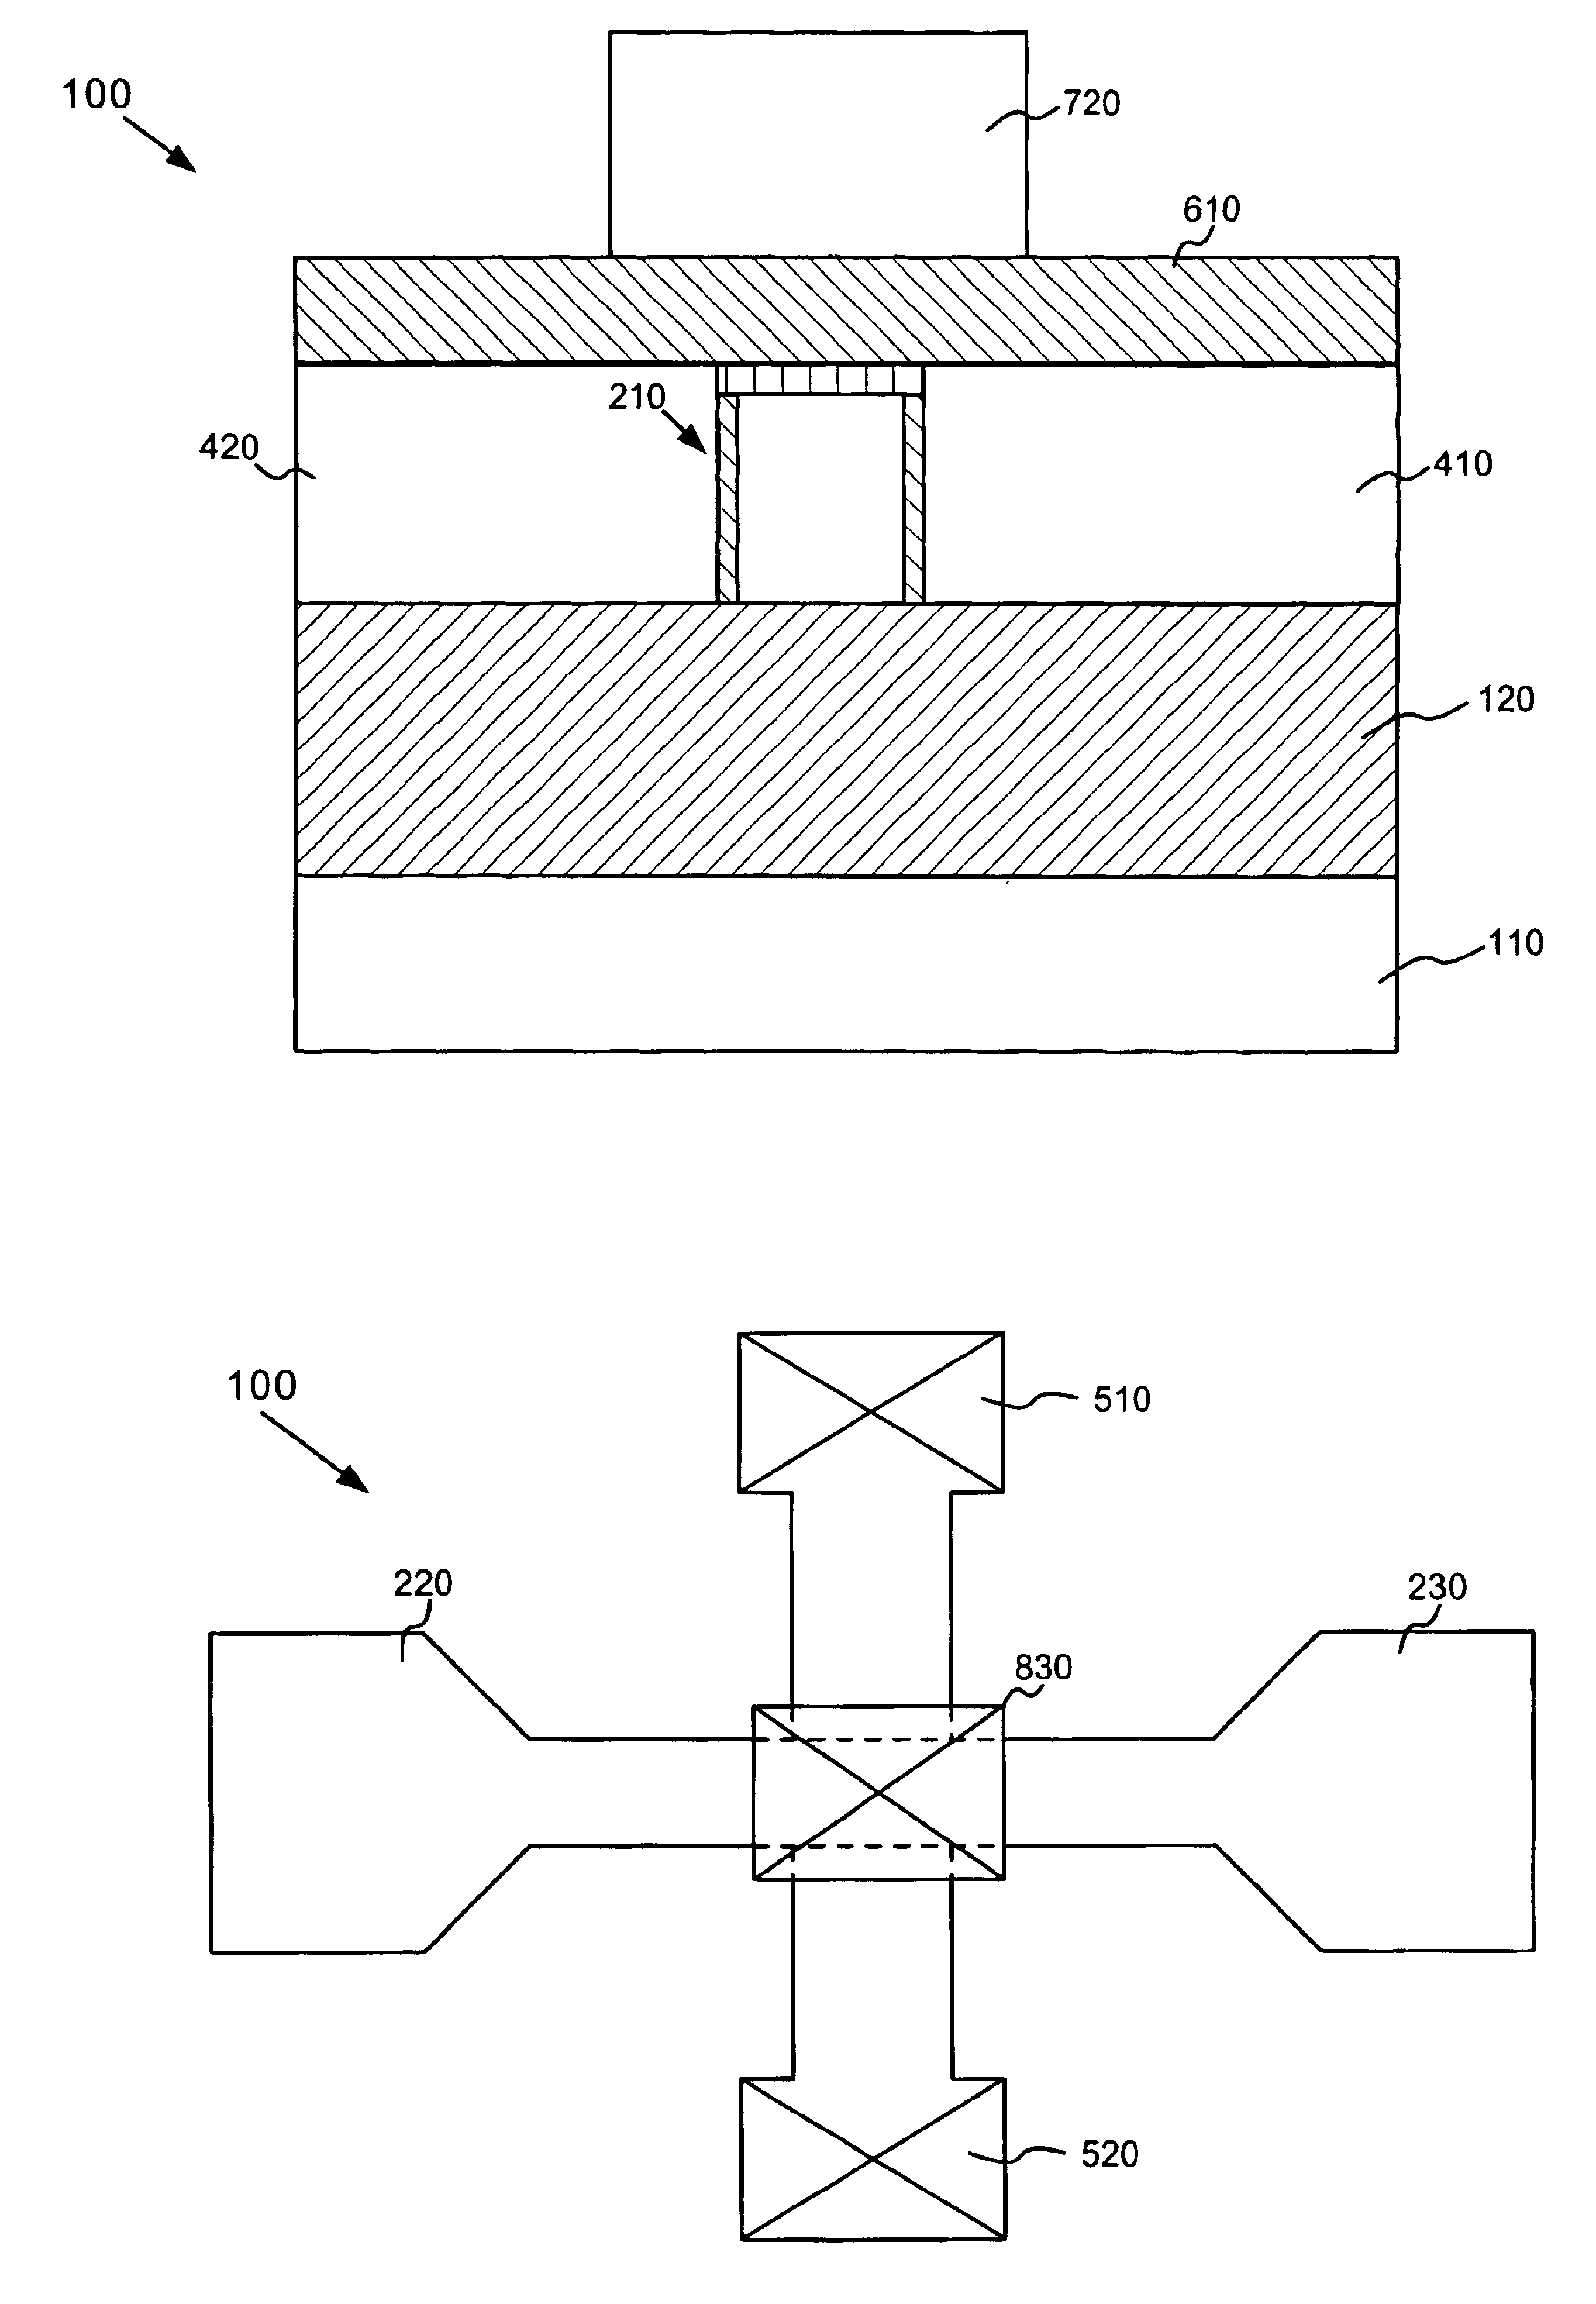 Additional gate control for a double-gate MOSFET